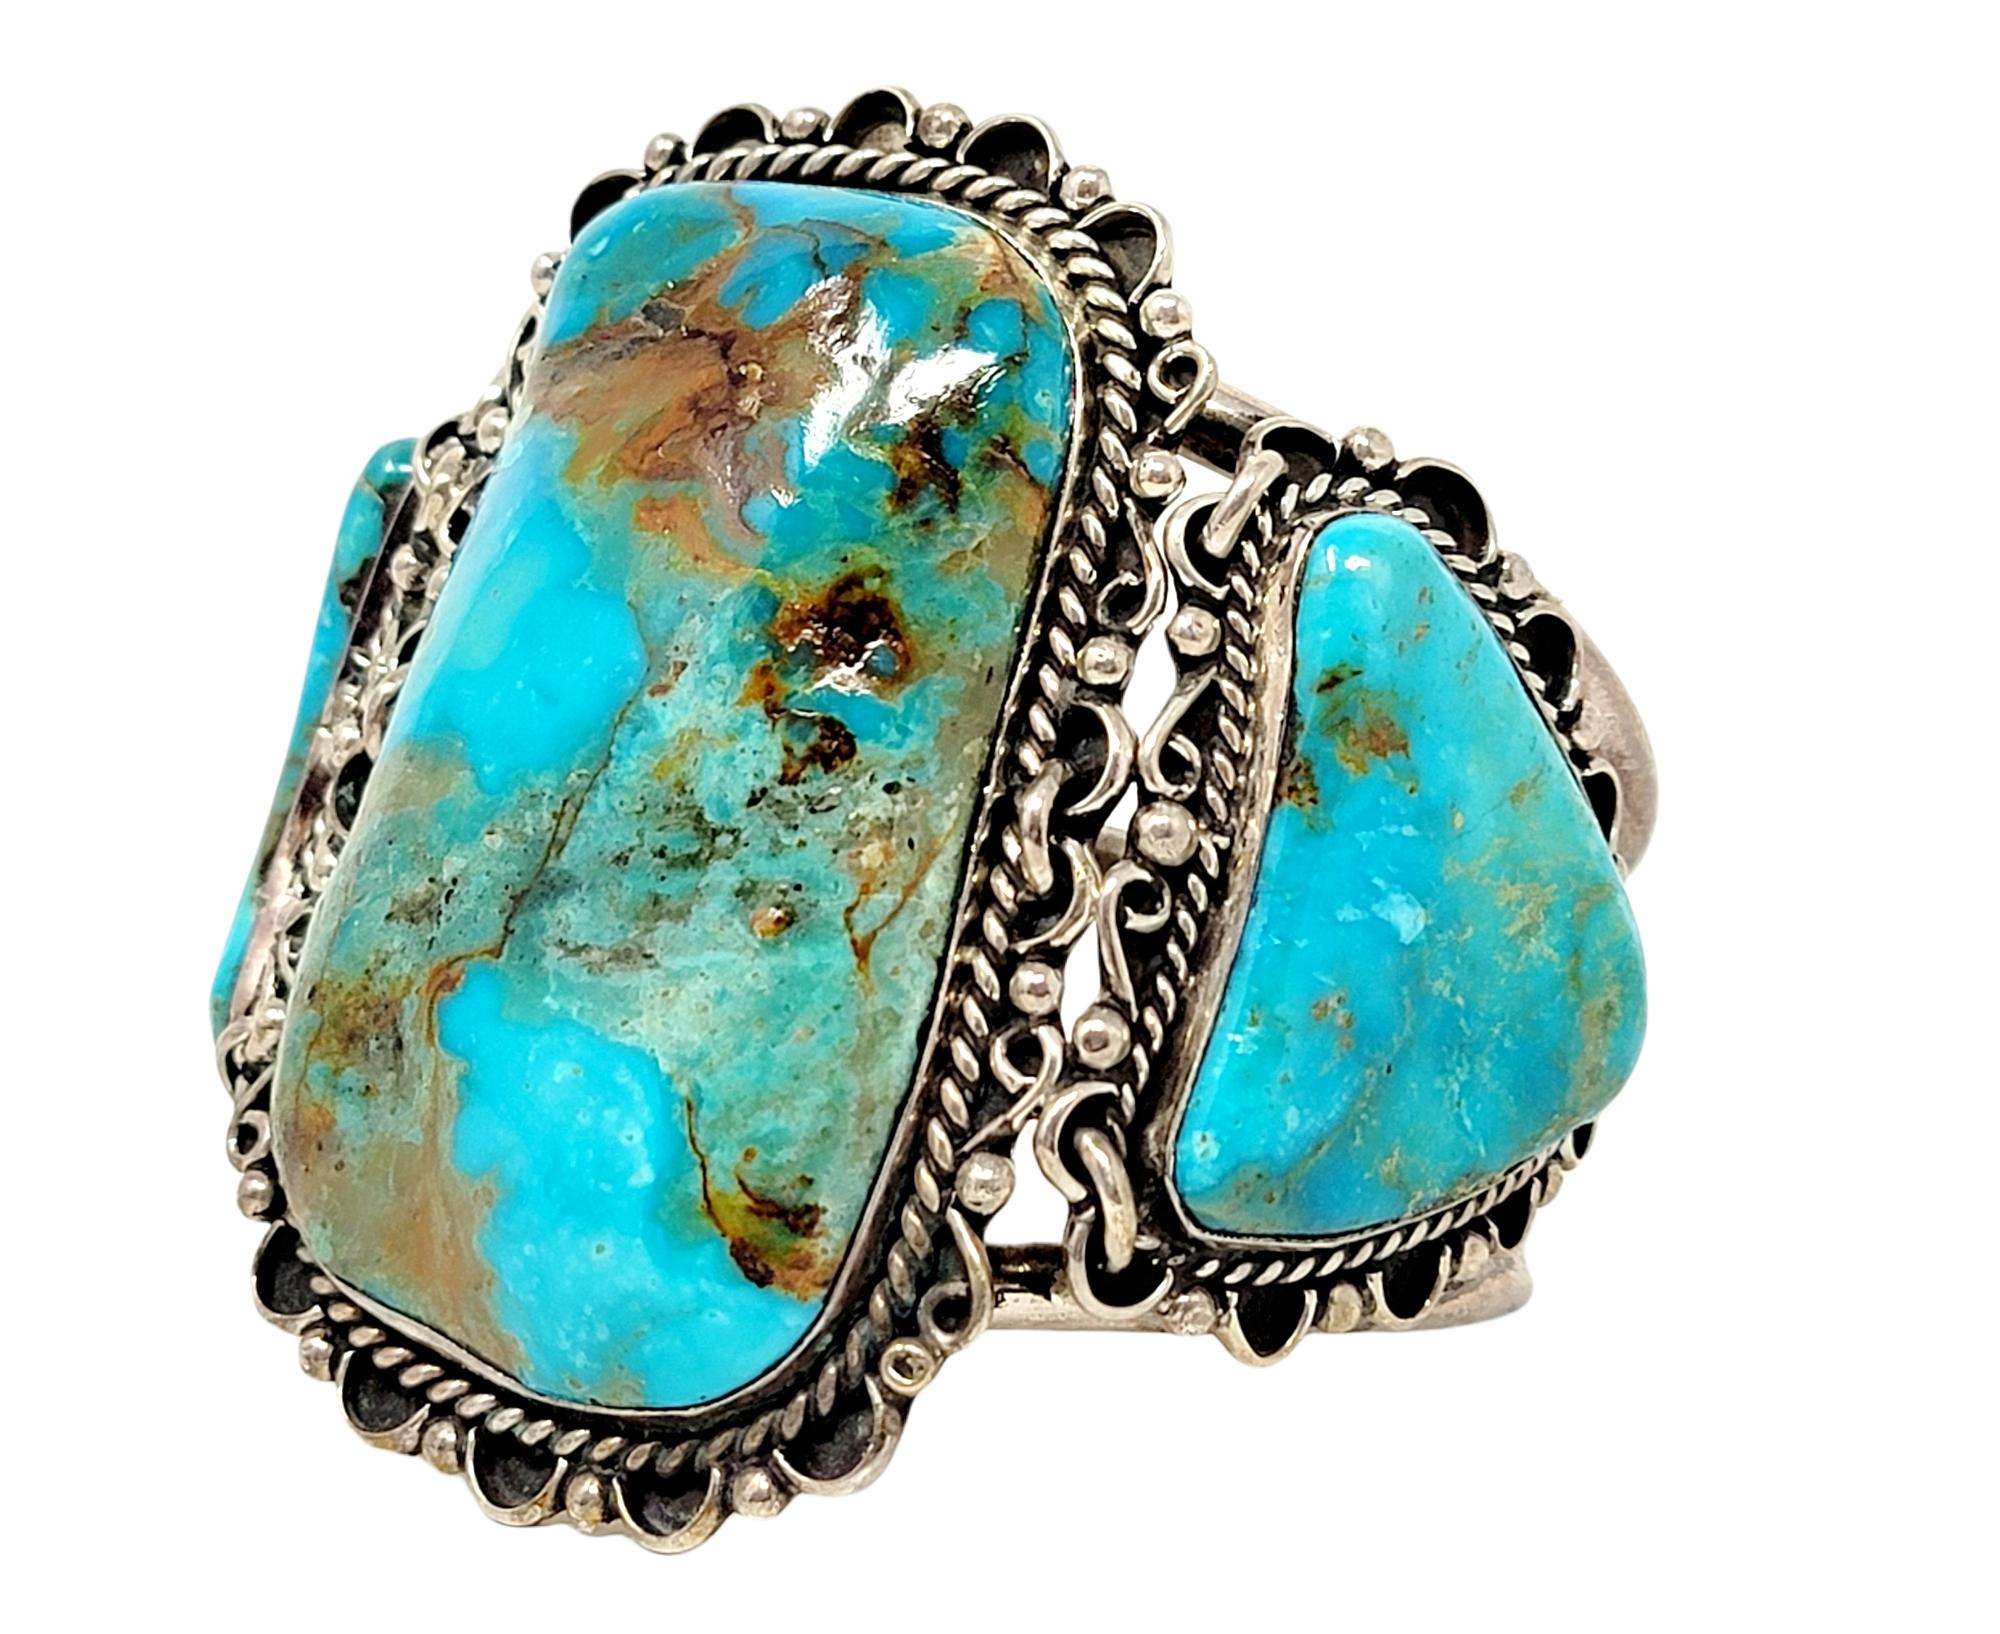 Native American M. Weahkee Oversize Sterling Silver and Natural Turquoise Navajo Cuff Bracelet